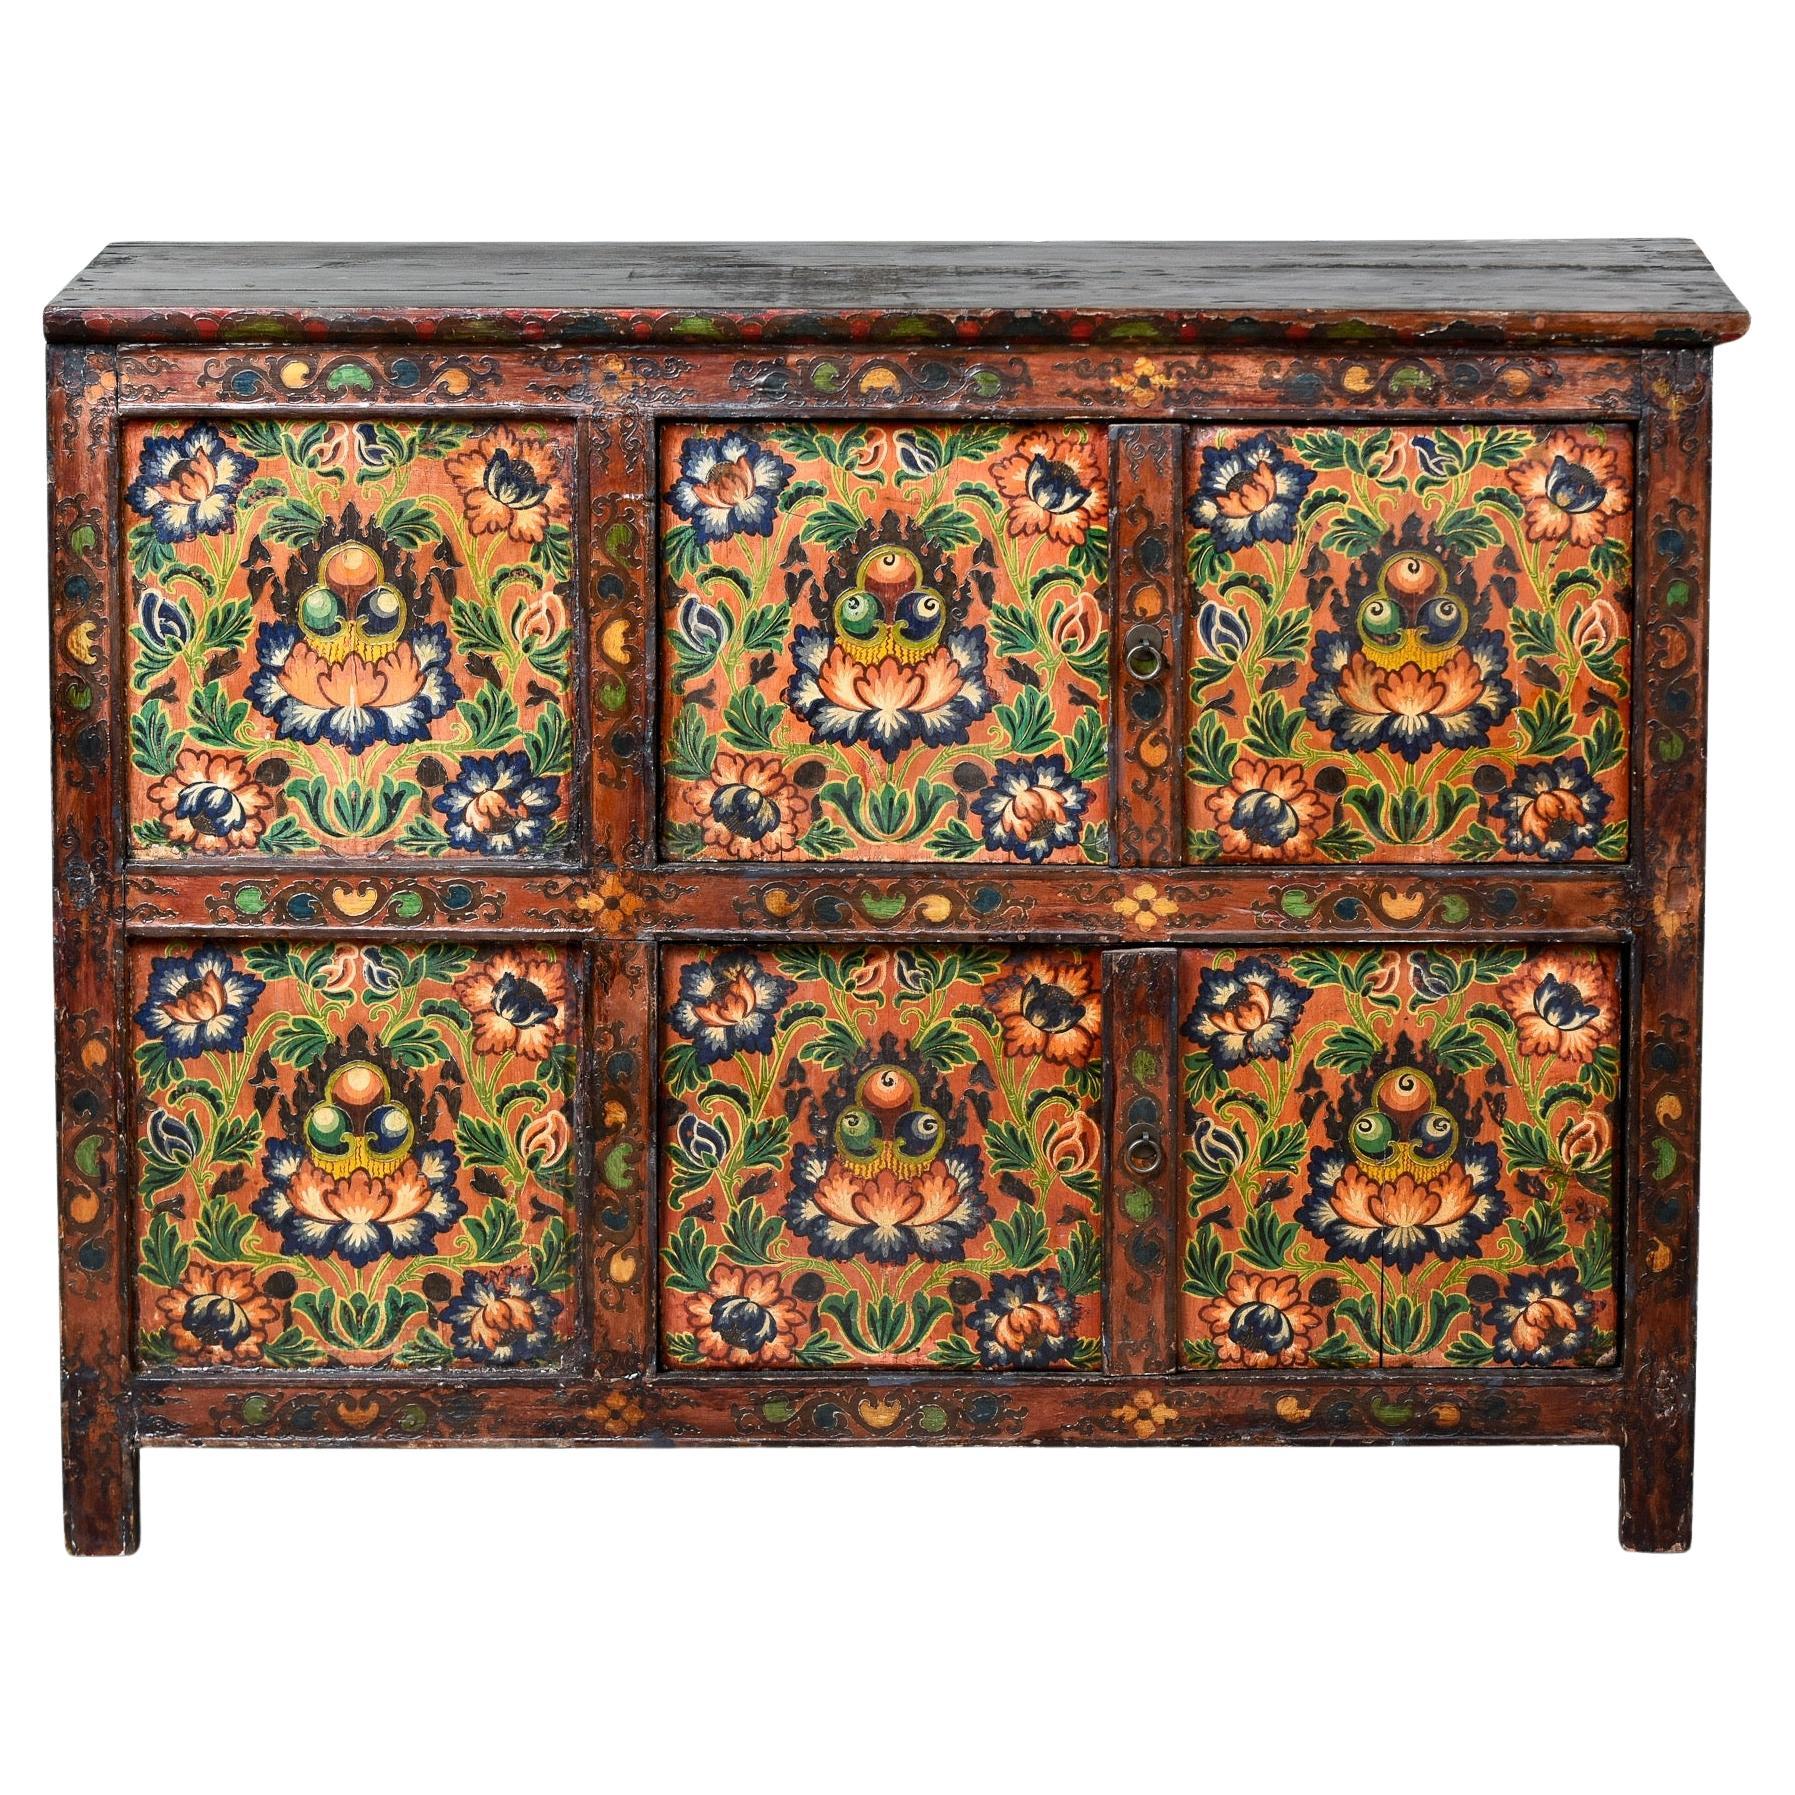 Early 20th C Gold and Blue Lotus Blossom Six Panel Tibetan Cabinet For Sale